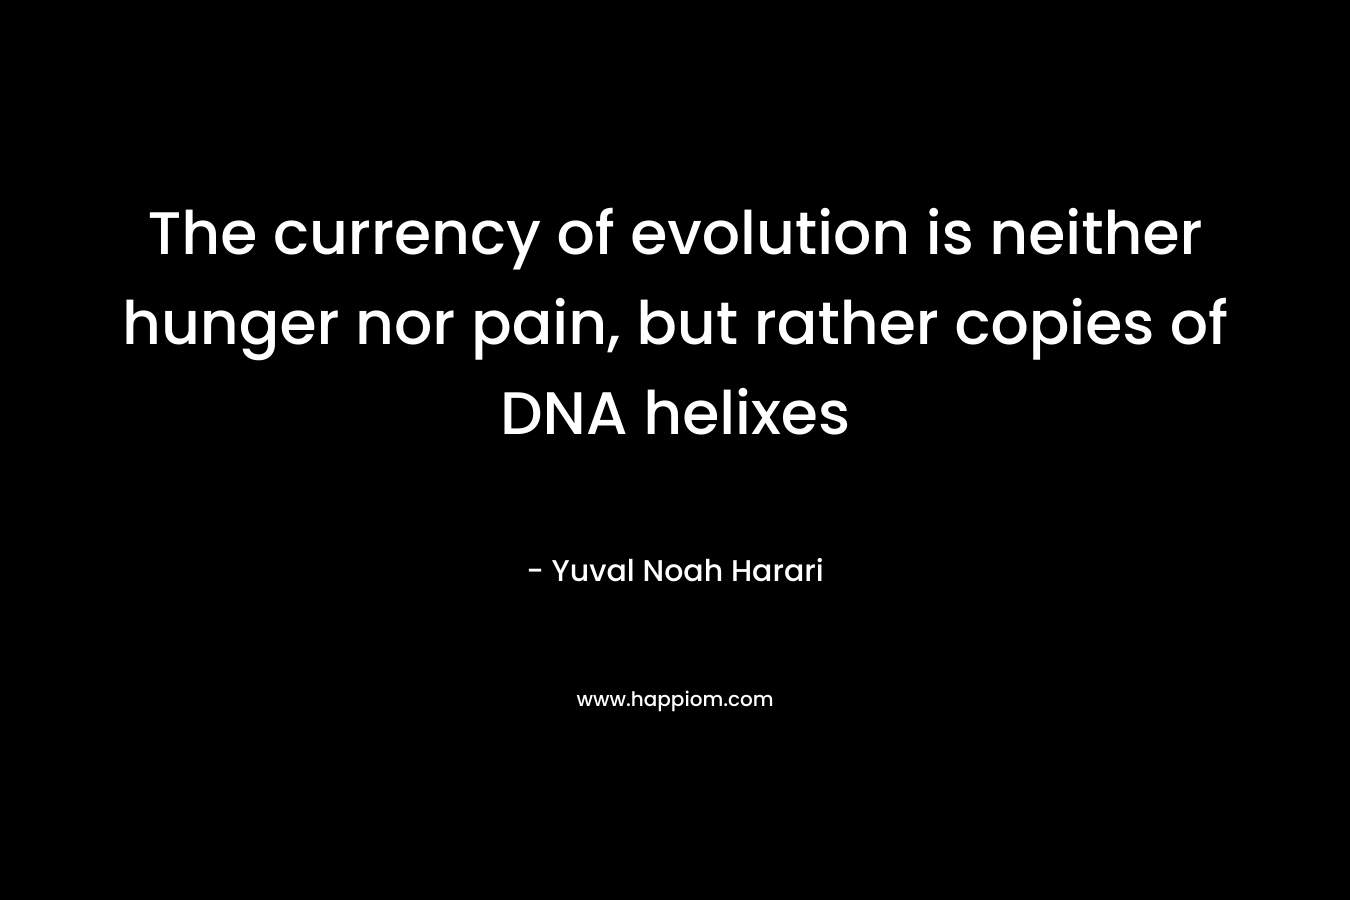 The currency of evolution is neither hunger nor pain, but rather copies of DNA helixes